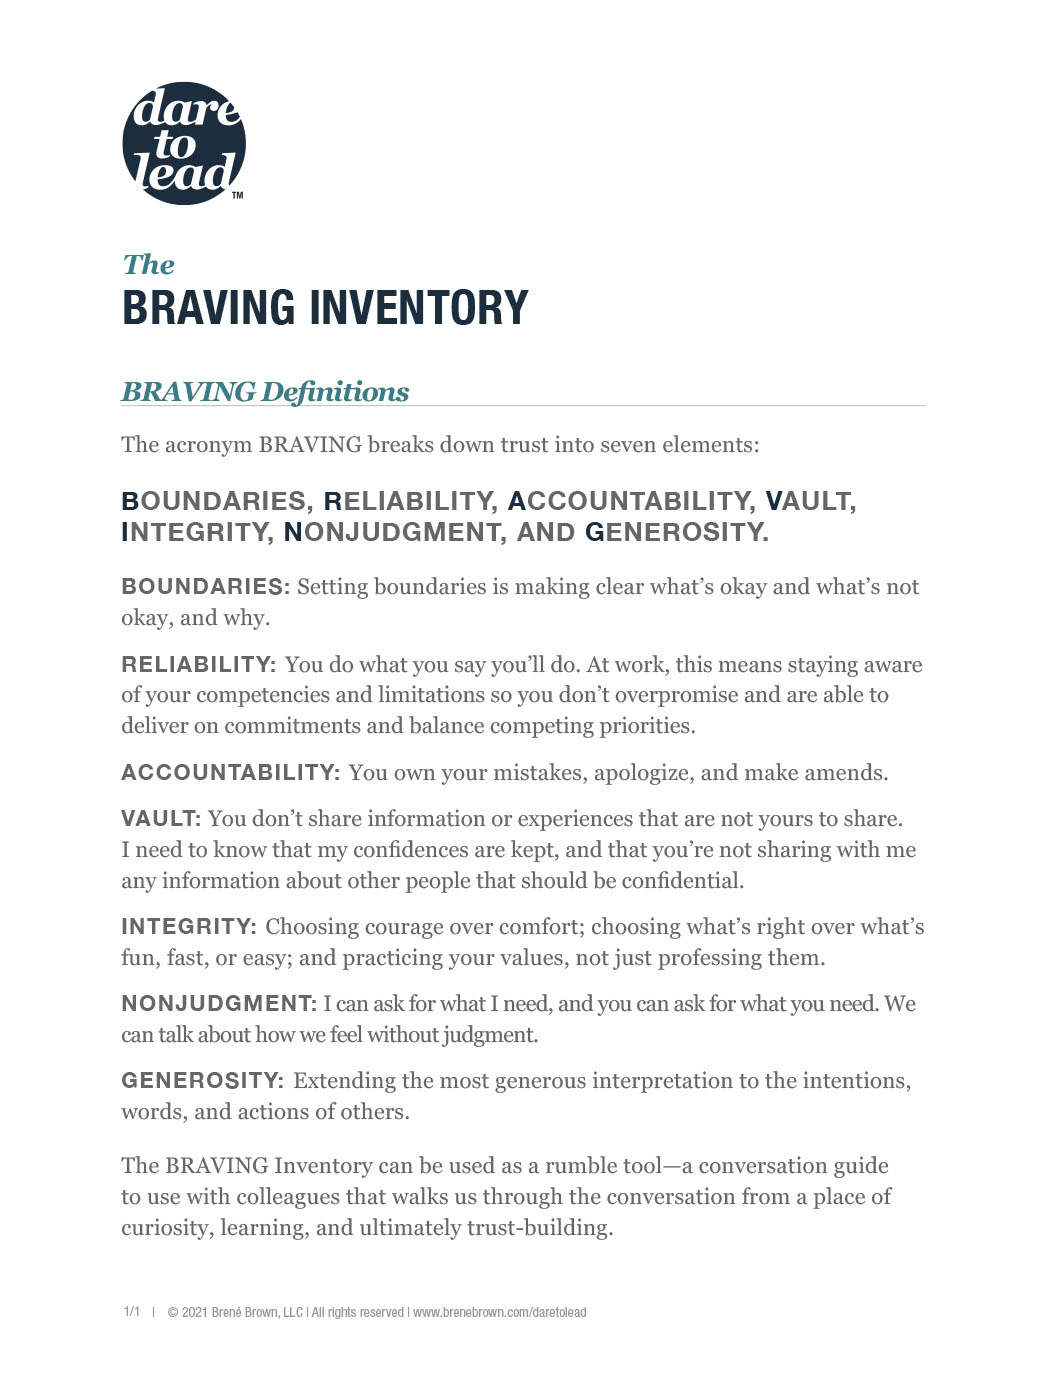 The BRAVING Inventory